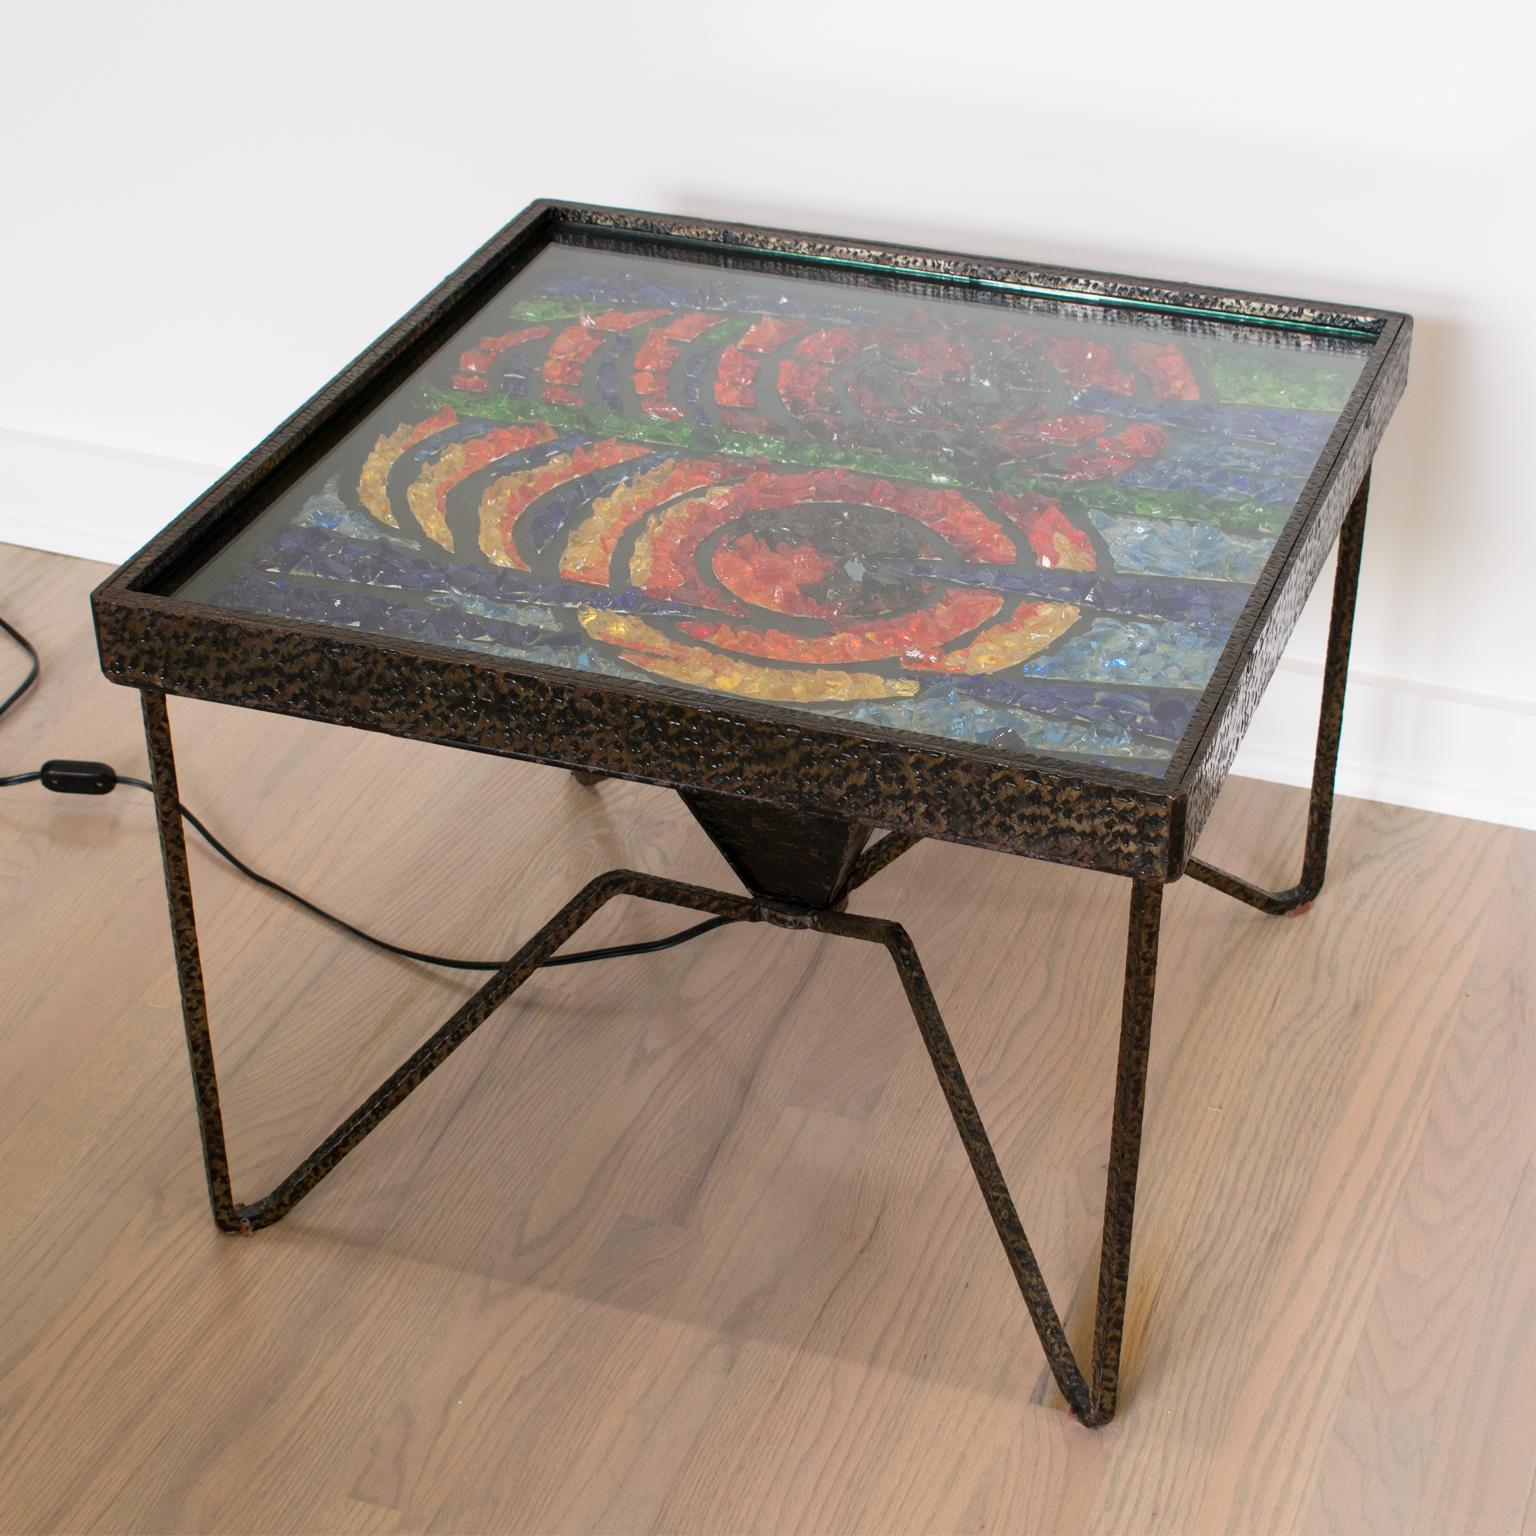 Here is an elegantly crafted one-of-a-kind 1960s coffee or side table. This cocktail table features an eye-catching geometric mosaic top with glass chunks encased in a textured wrought iron table base with spider-shaped legs. A glass tabletop